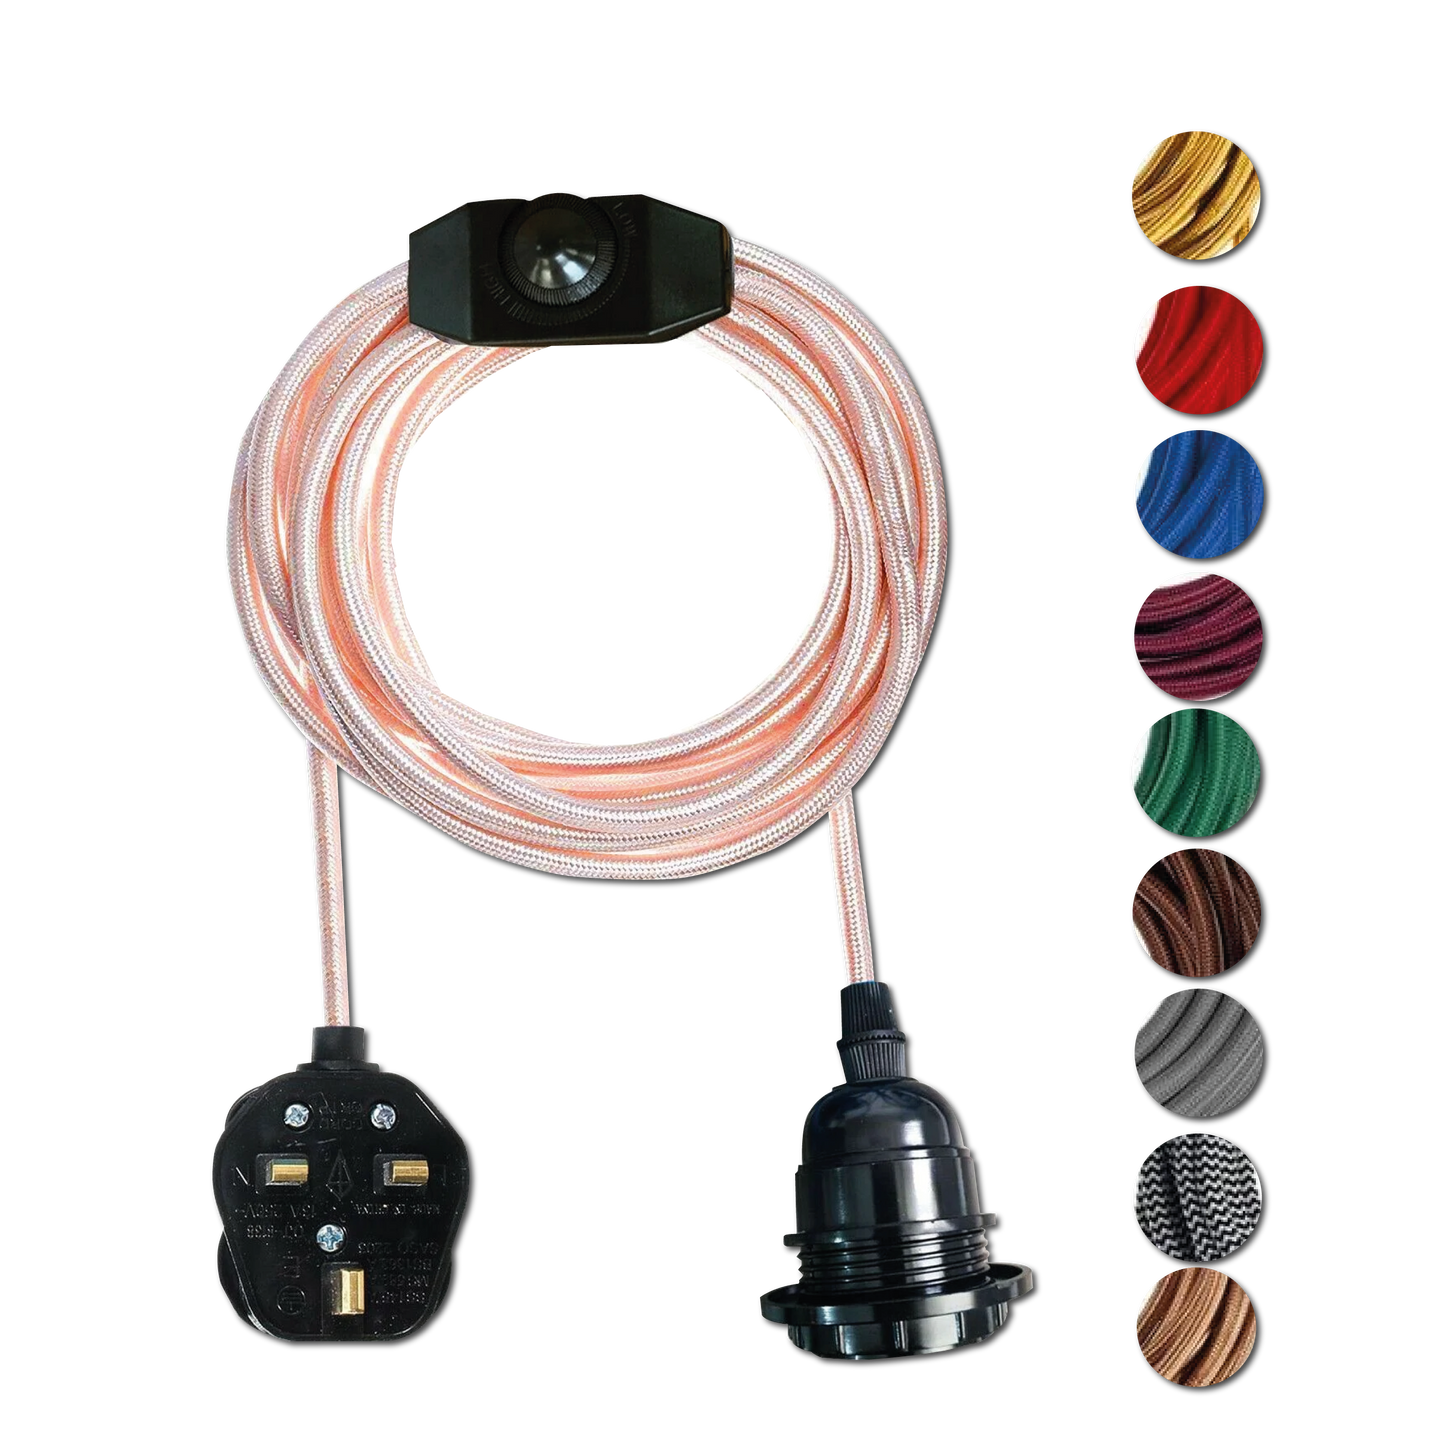 E27 Plug-in Pendant Holder with Fabric Cable Pendant Lamp Bulb Socket